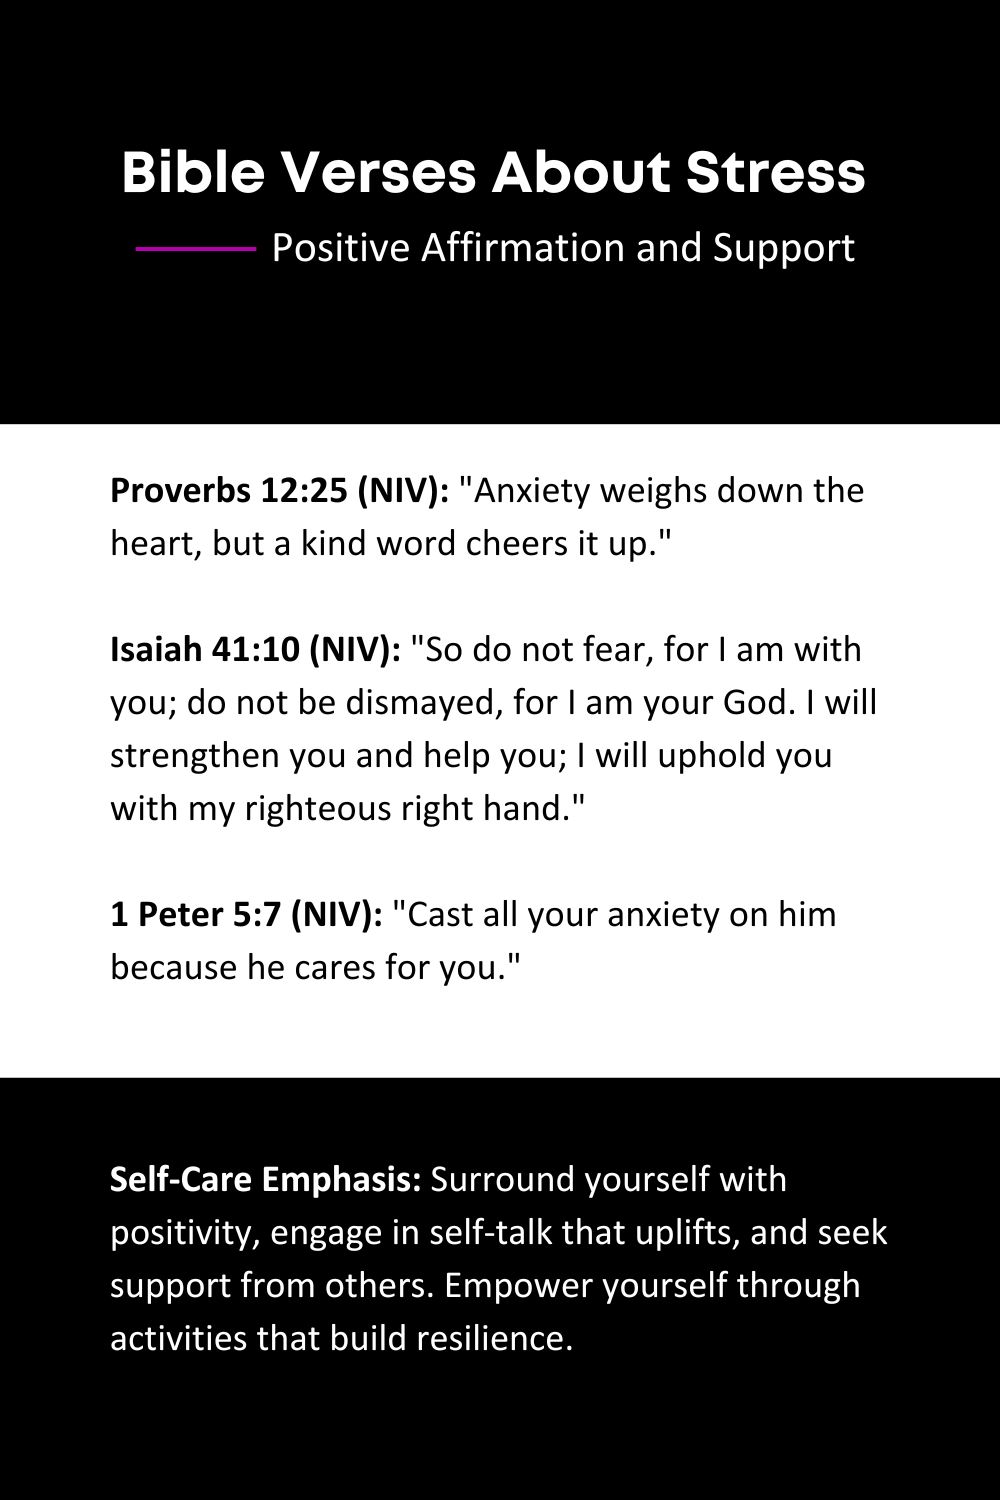 Bible-Verses-About-Stress-Positive-Affirmation-and-Support